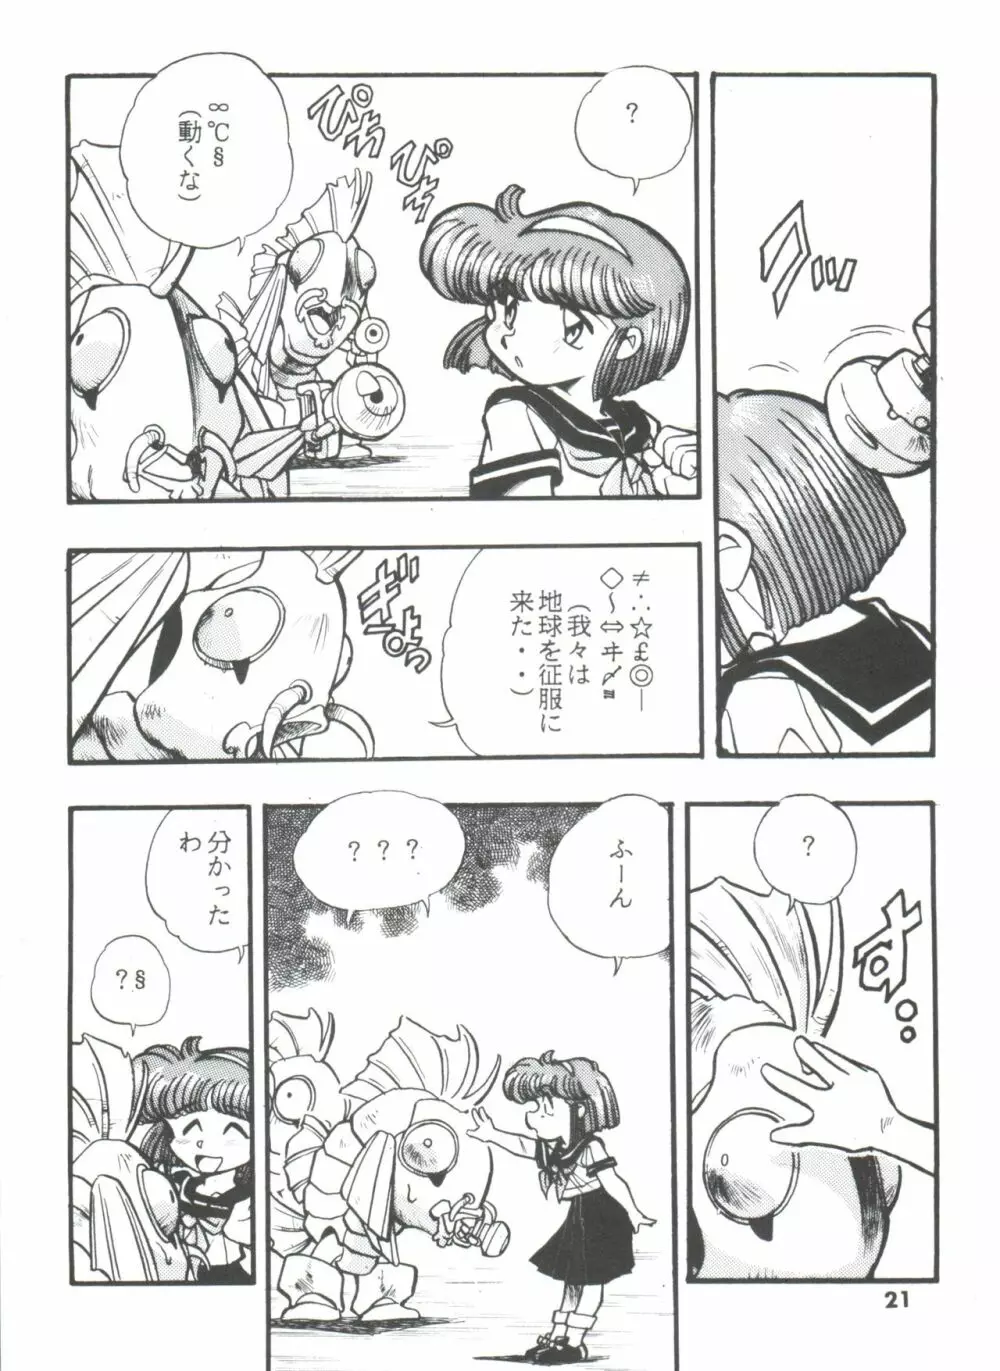 DK・1 III - page21